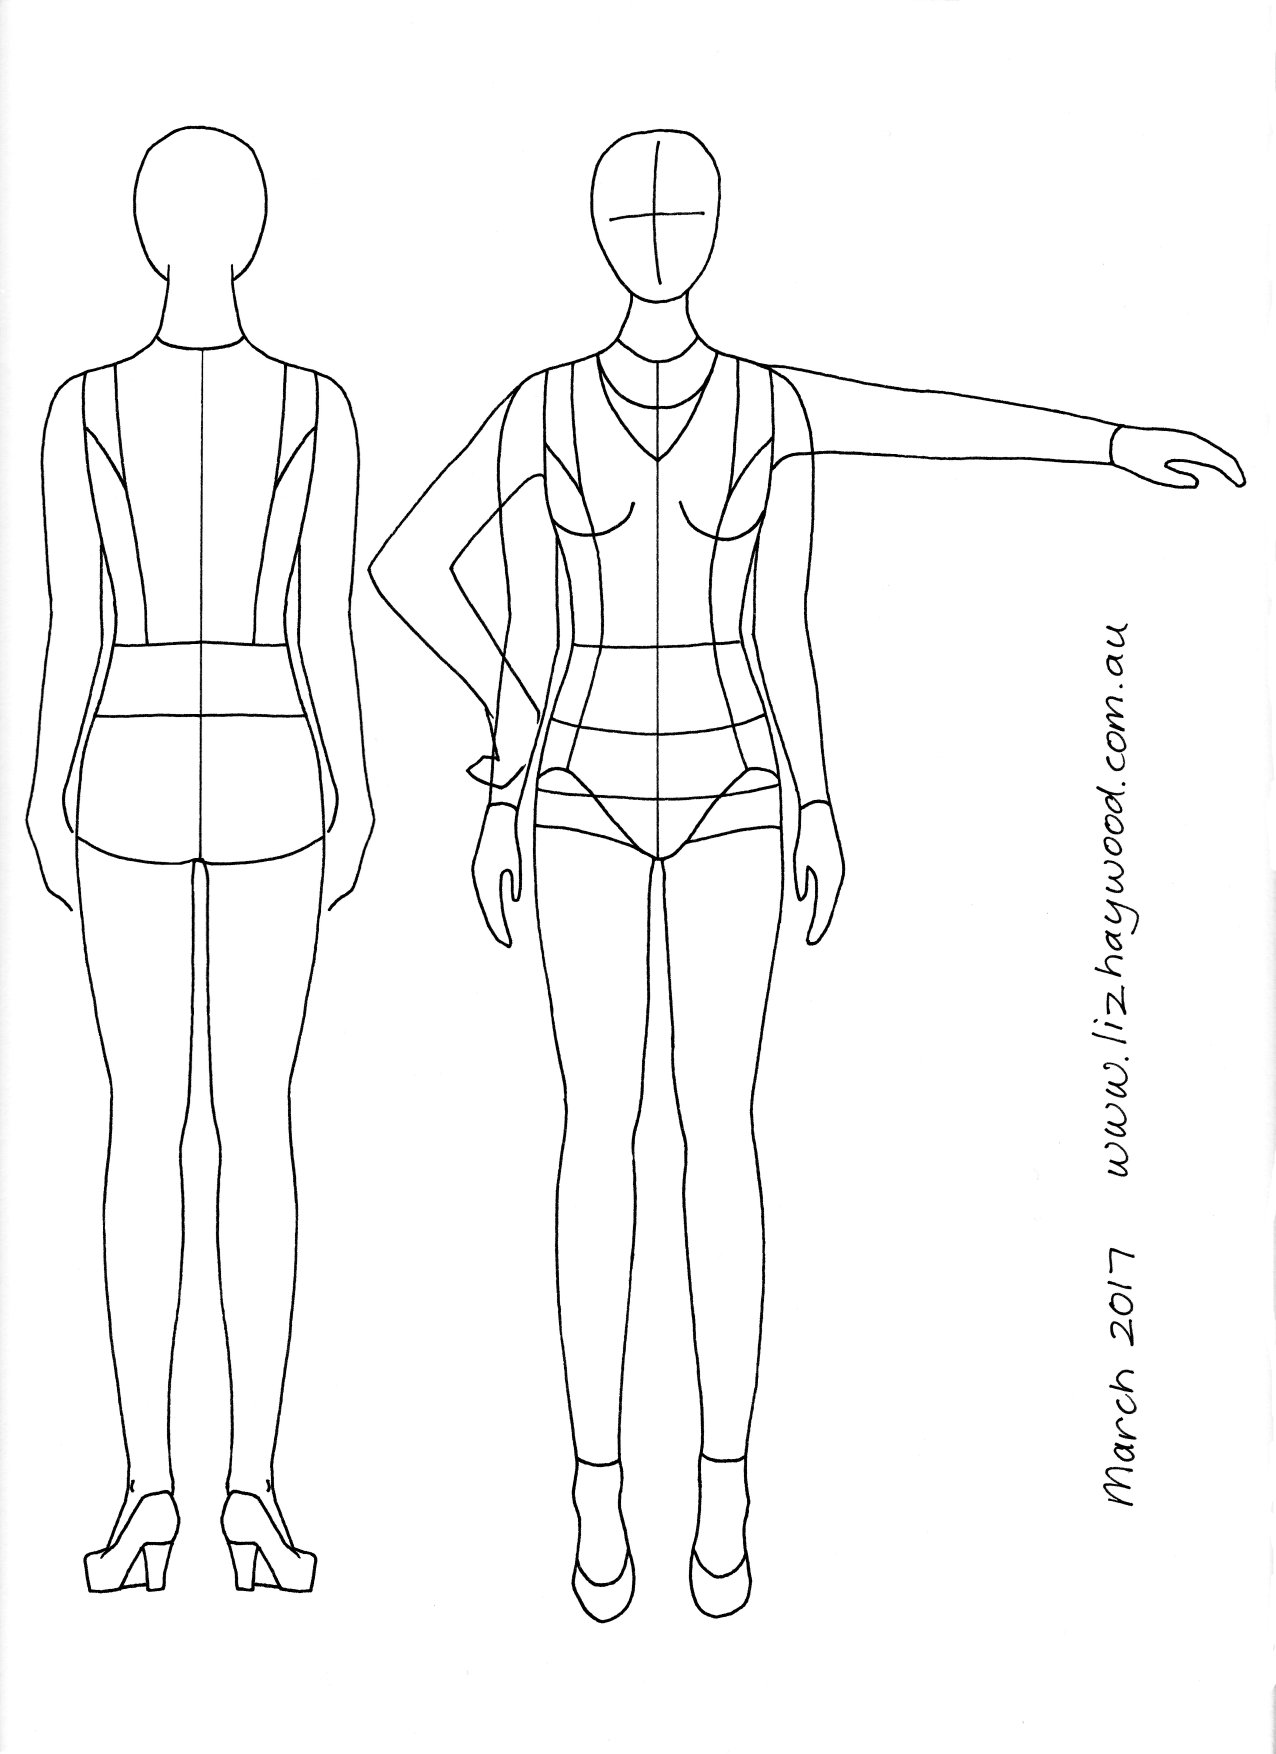 How to draw clothes - The Craft of Clothes